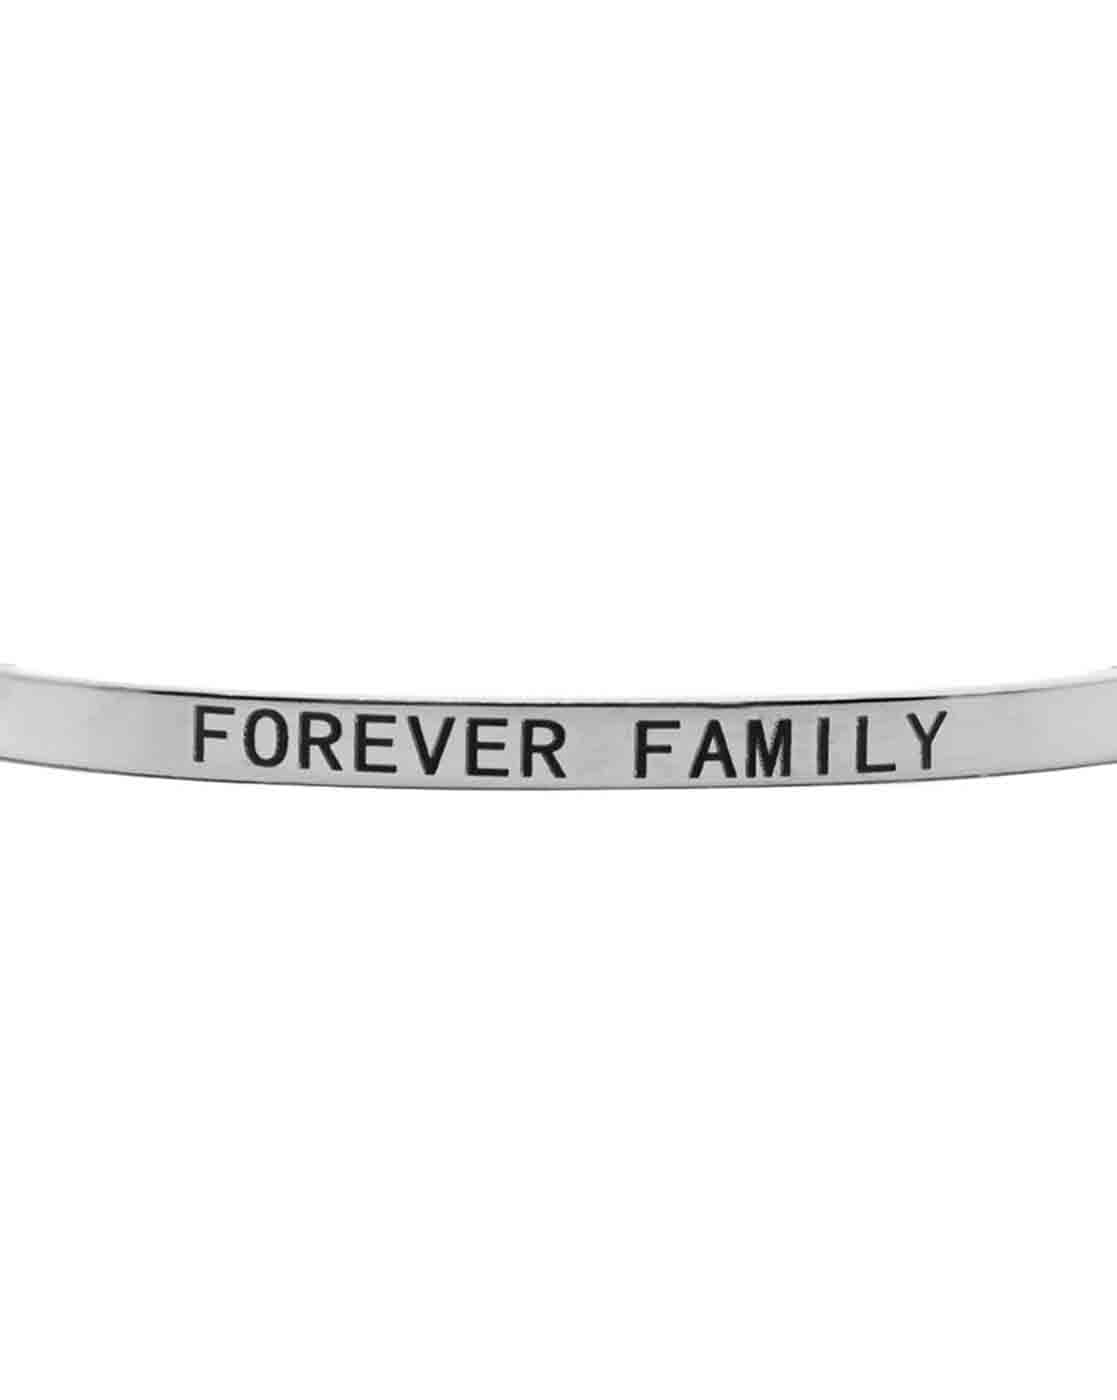 Buy A grandmother's love lasts forever Bracelet Family Jewelry Christmas  Gift for Her Women Mantra Cuff Bangle, Metal, no gemstone at Amazon.in